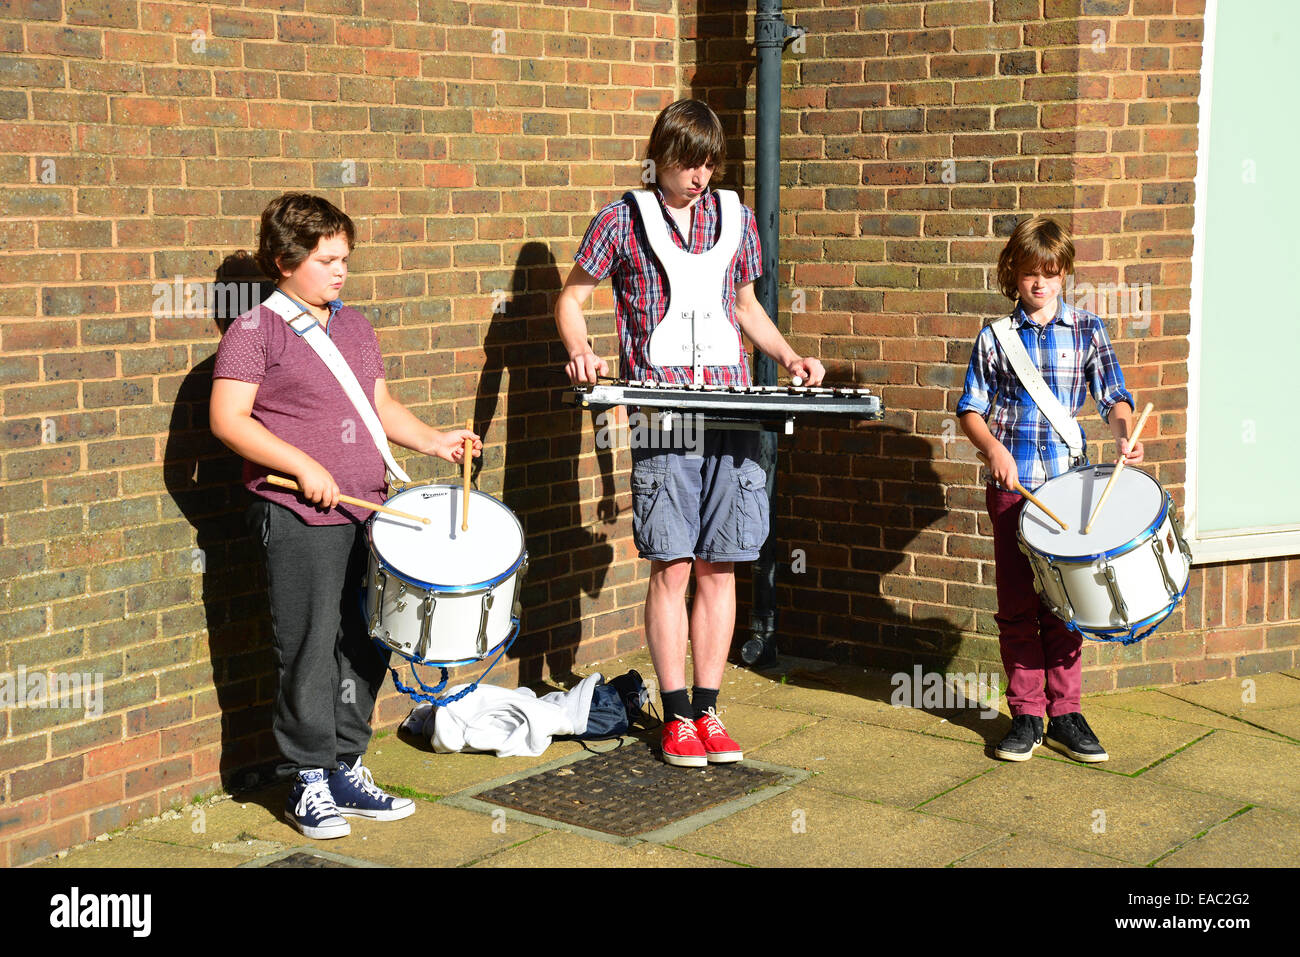 Young Boy Buskers, St Thomas' Square, Newport, Isle Of Wight, England, Vereinigtes Königreich Stockfoto